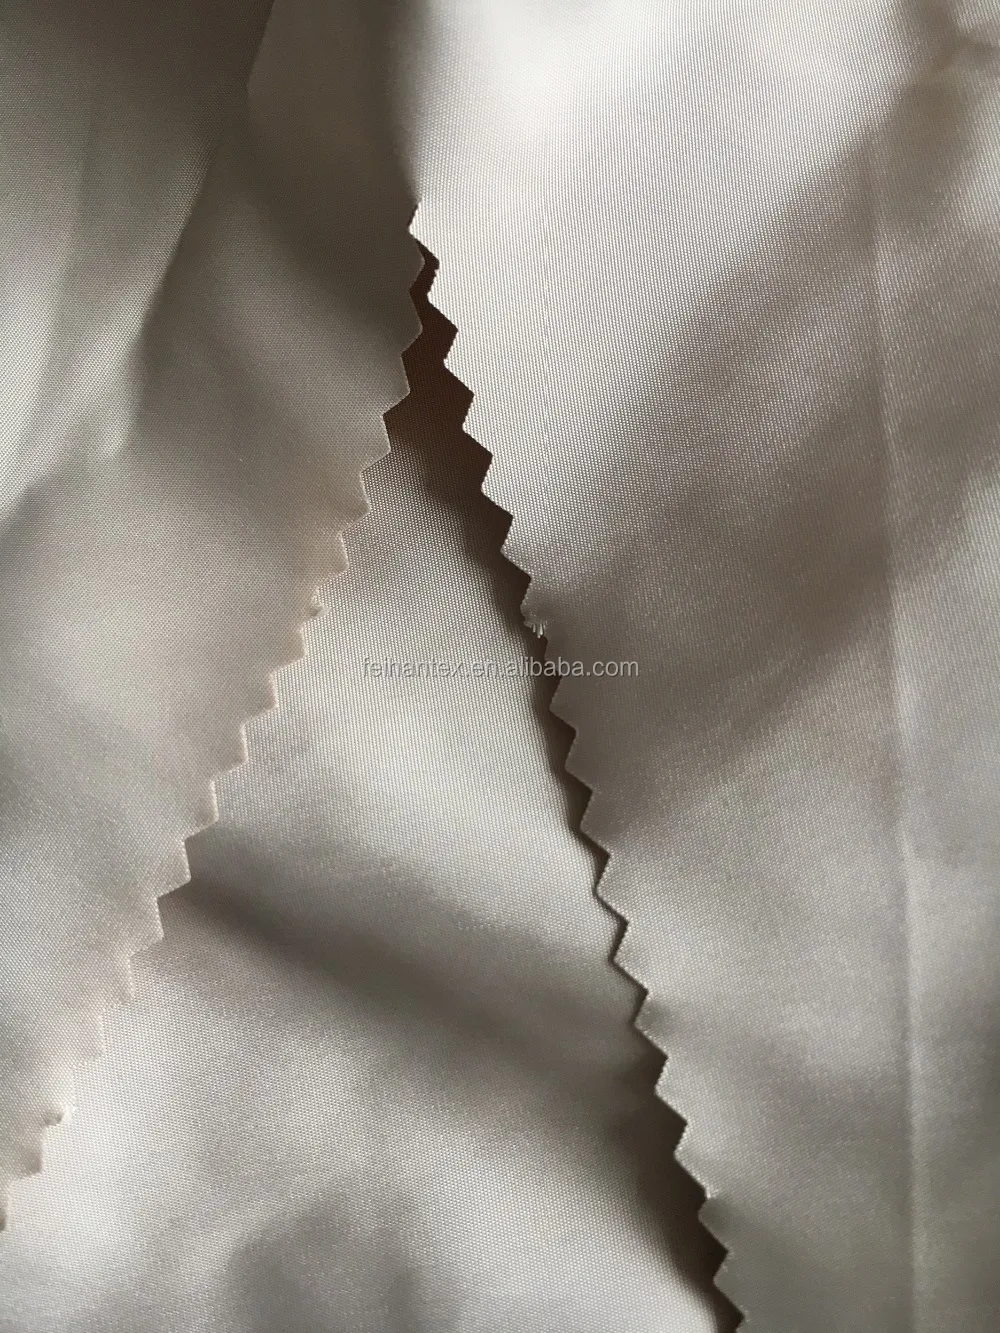 75d*75d 100% polyester shape memory fabric for jacket